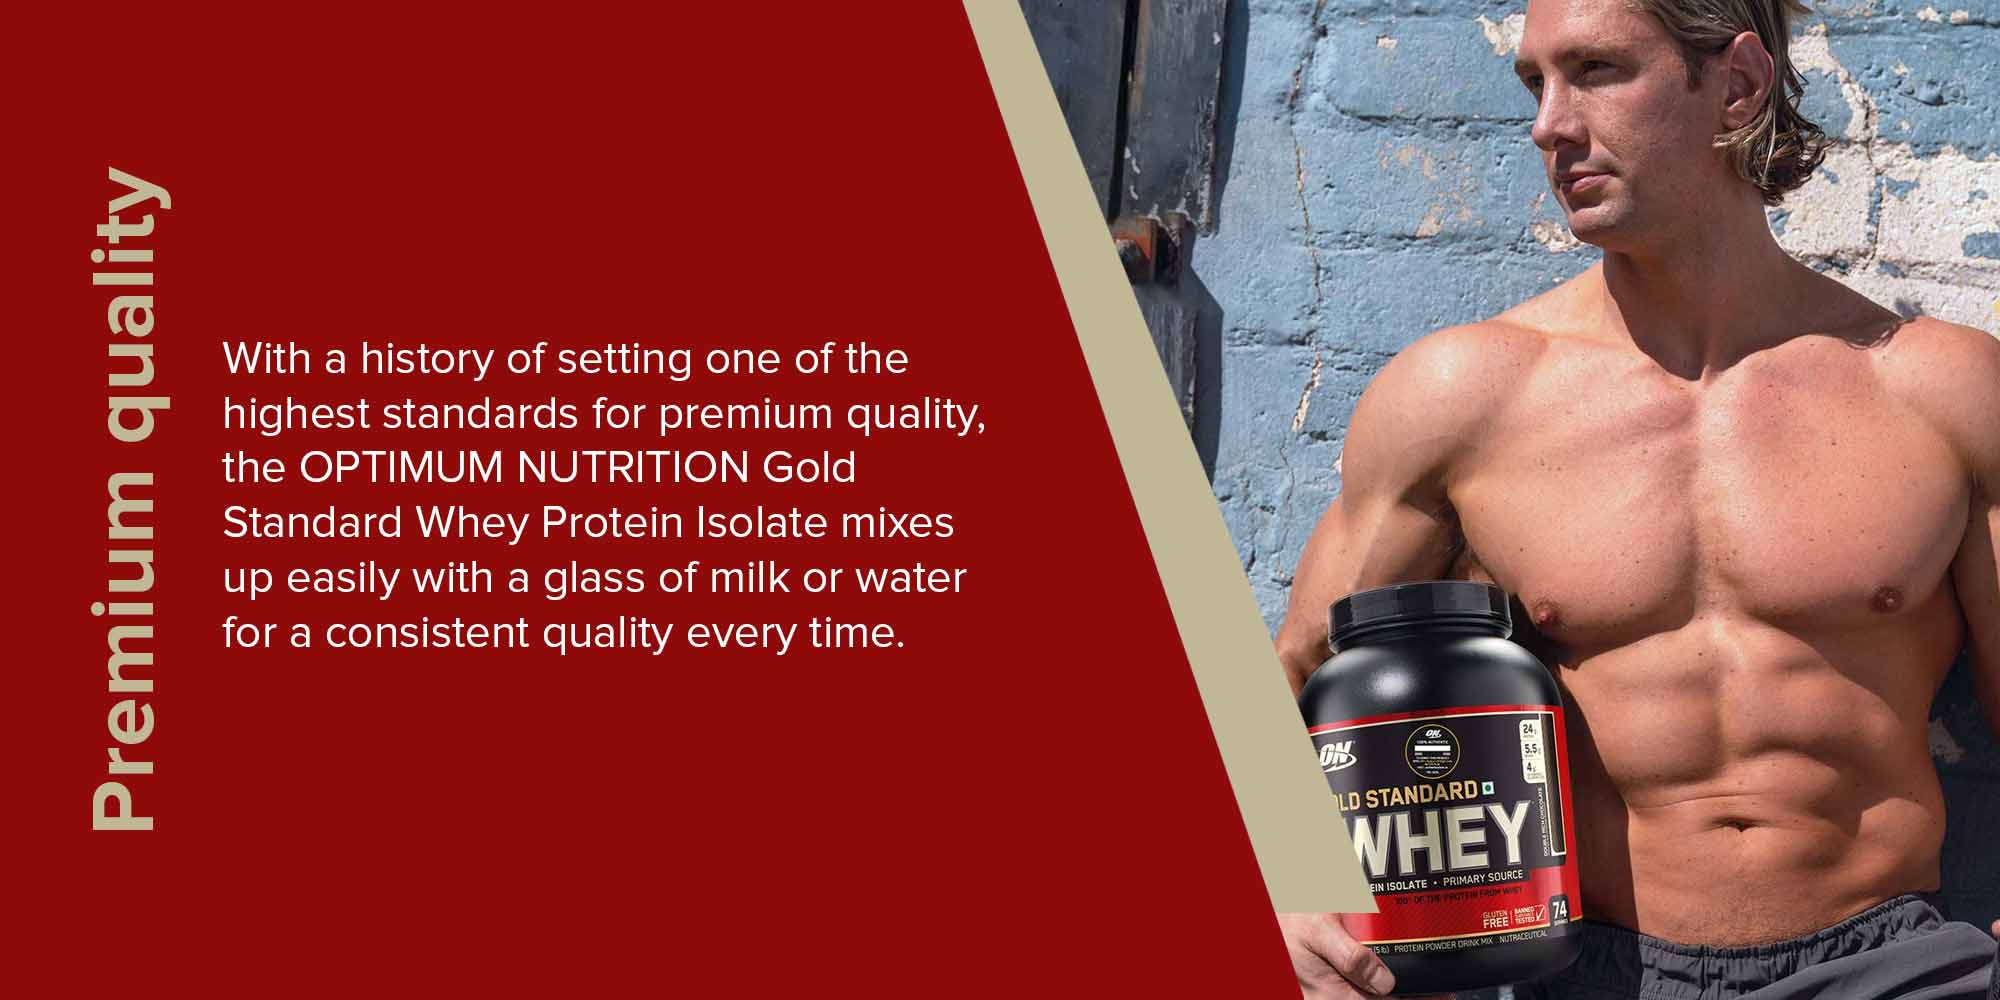 Gold Standard Whey Protein Isolate